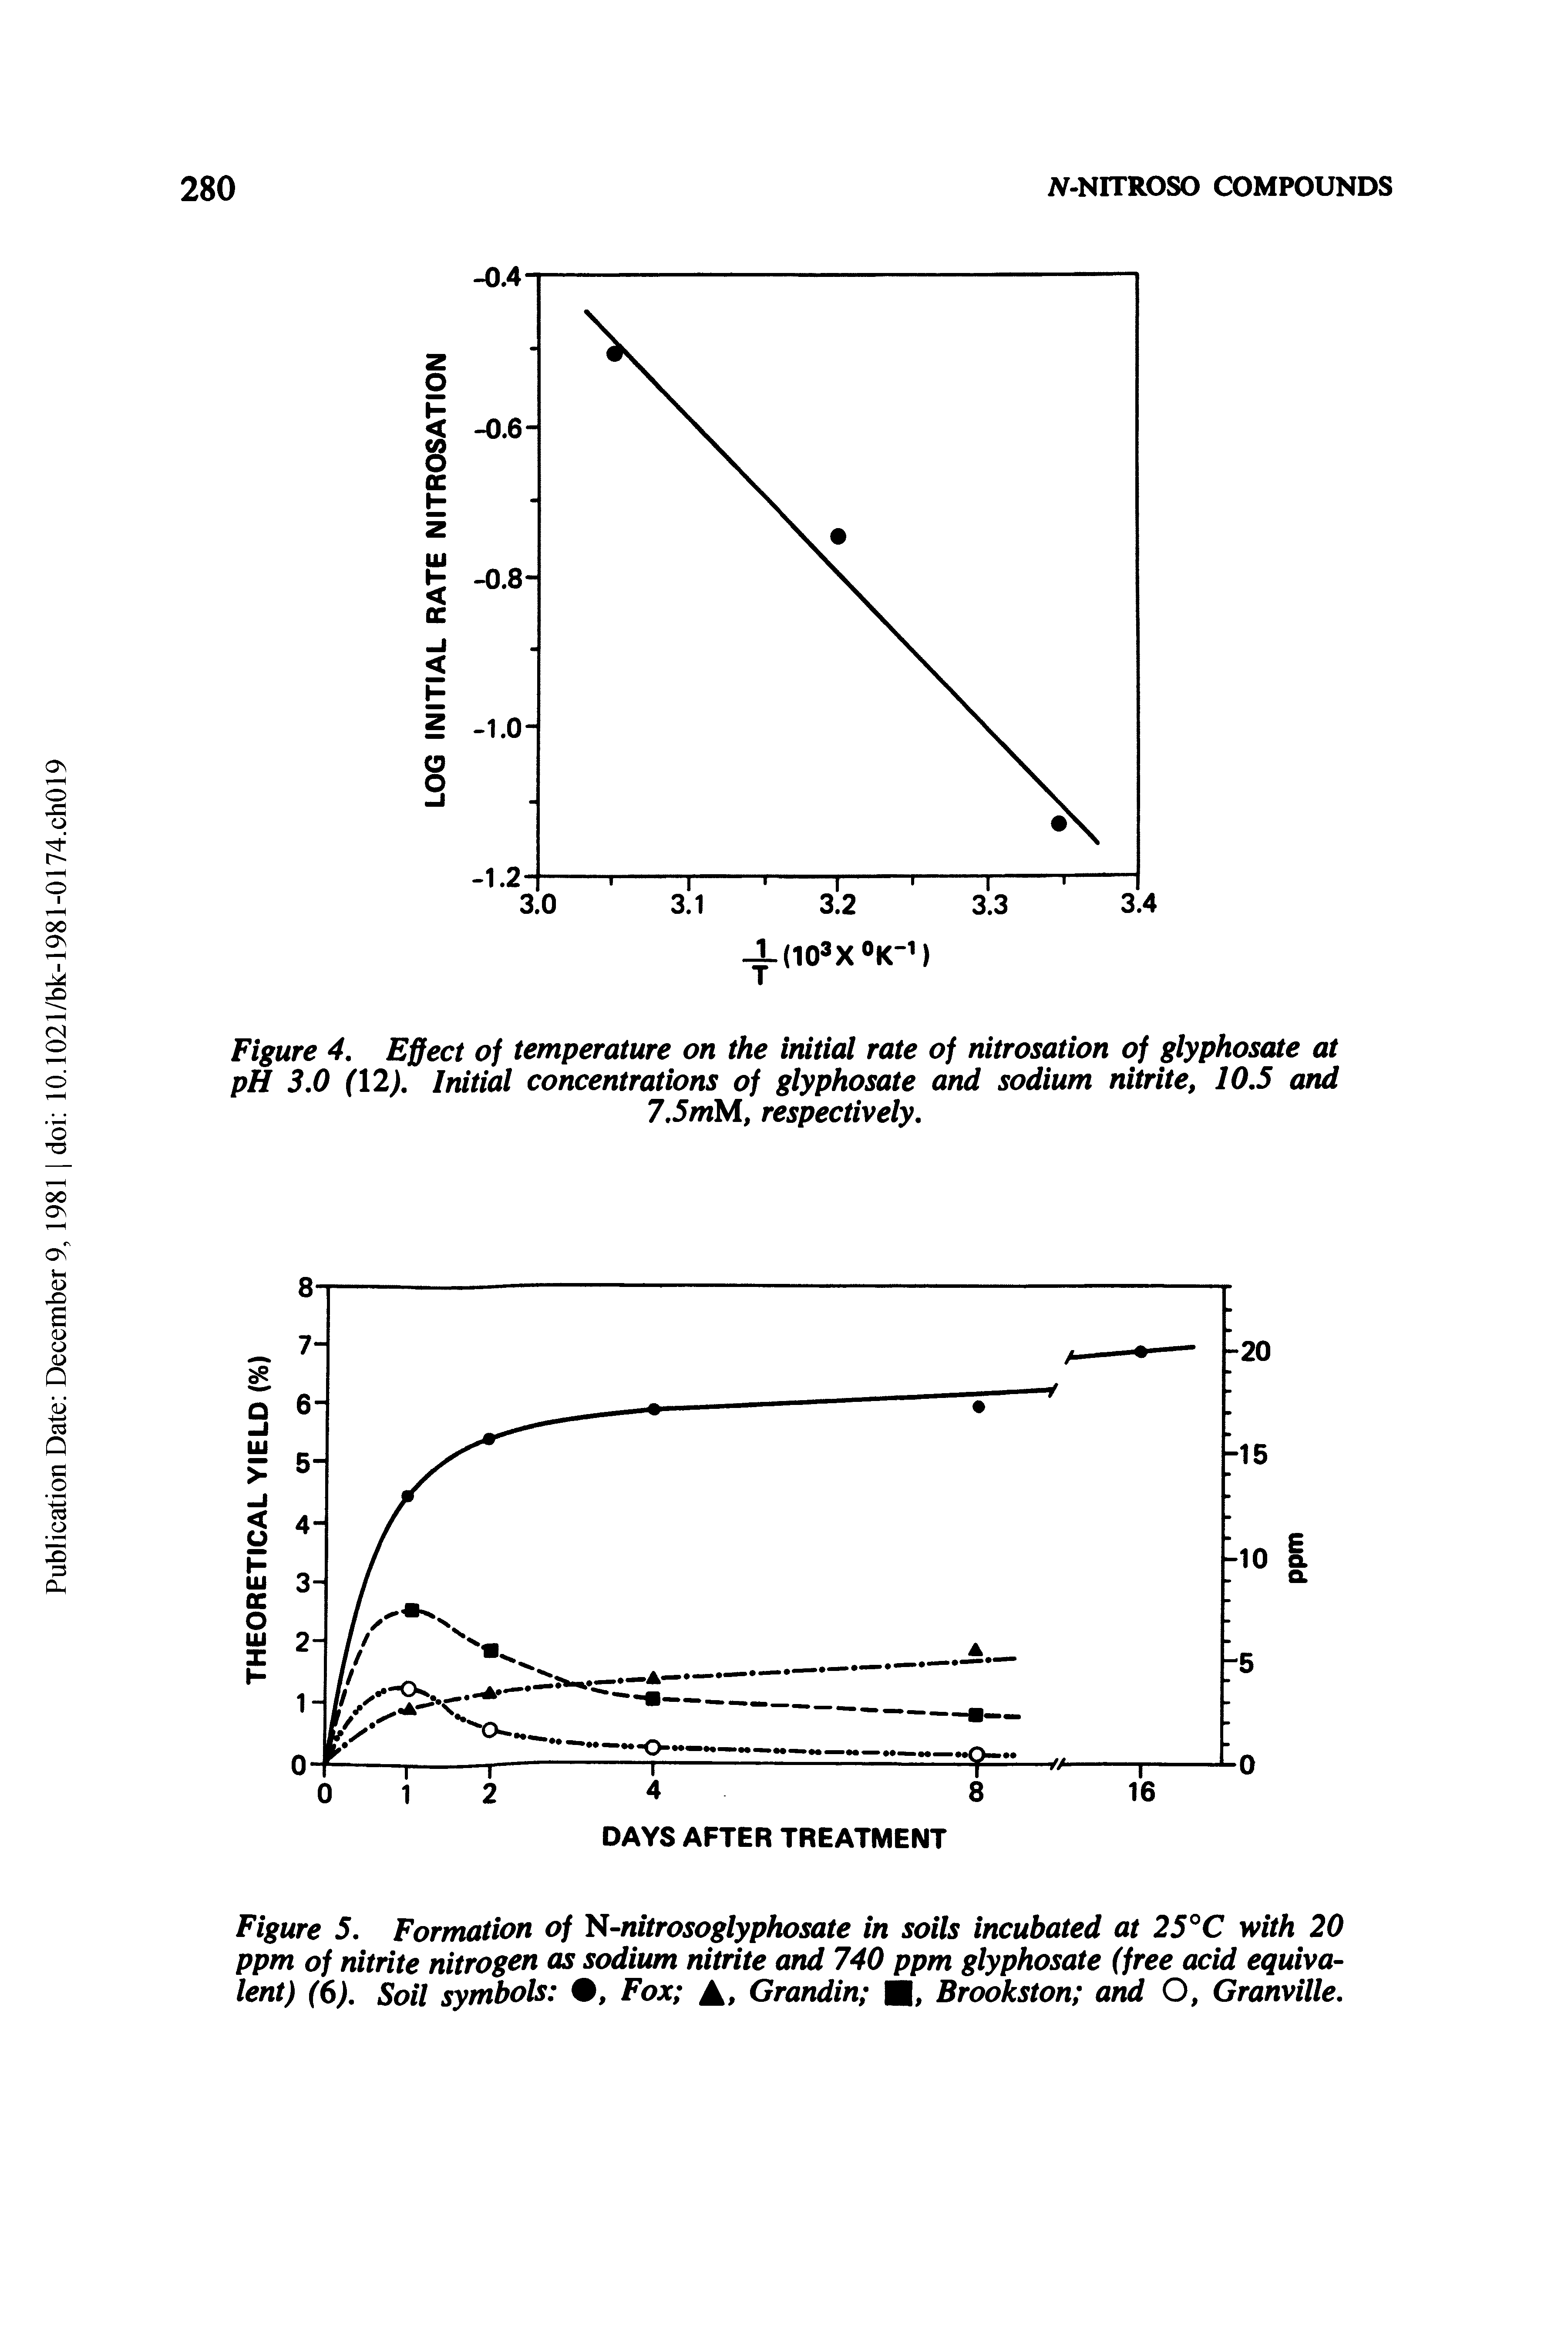 Figure 5, Formation of H-nitrosoglyphosate in soils incubated at 25°C with 20 ppm of nitrite nitrogen as sodium nitrite and 740 ppm glyphosate (free acid equivalent) (6), Soil syrnbols , Fox A, Grandin Brookston and O, Granville,...